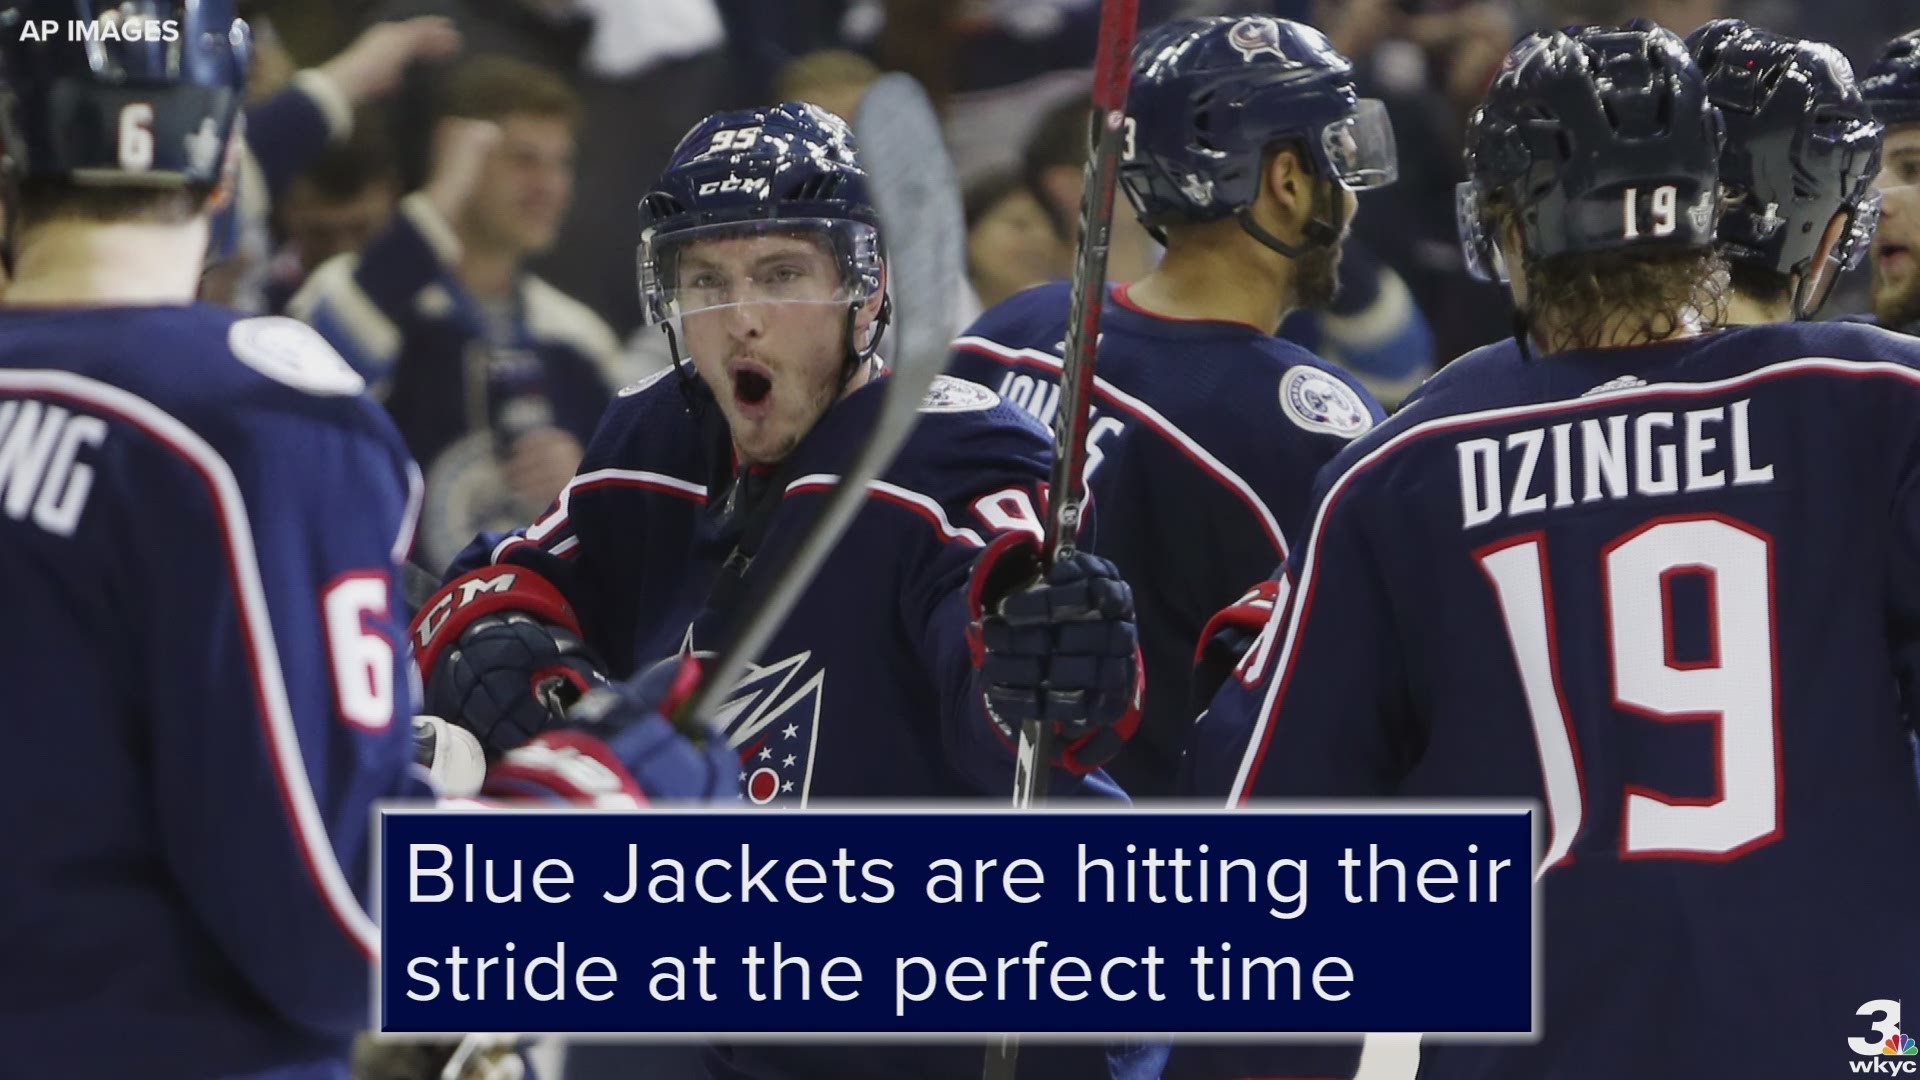 The Columbus Blue Jackets hit their stride at the perfect time...in the Stanley Cup Playoffs.